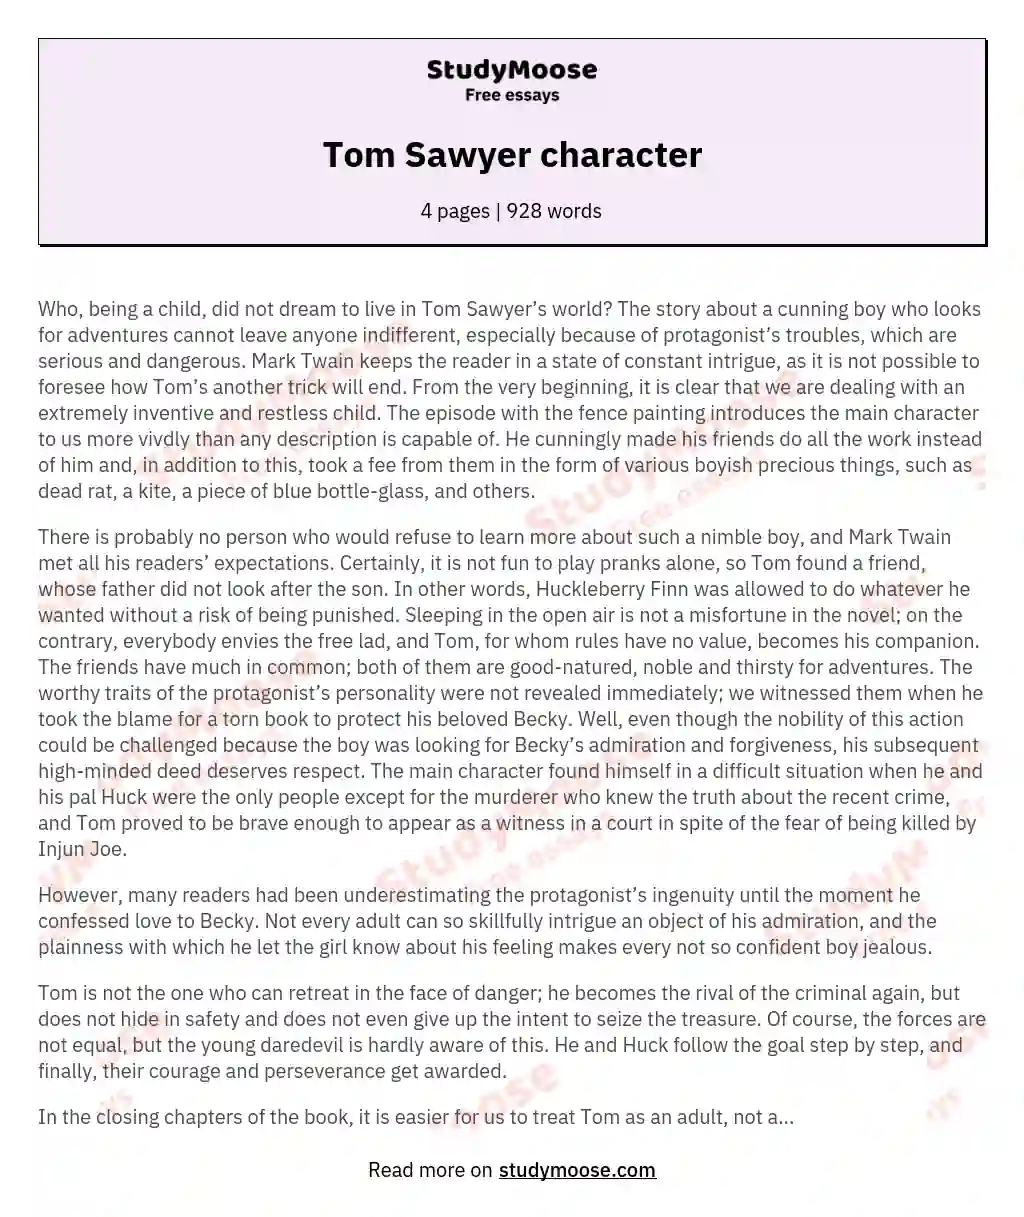 the adventures of tom sawyer characters descriptions